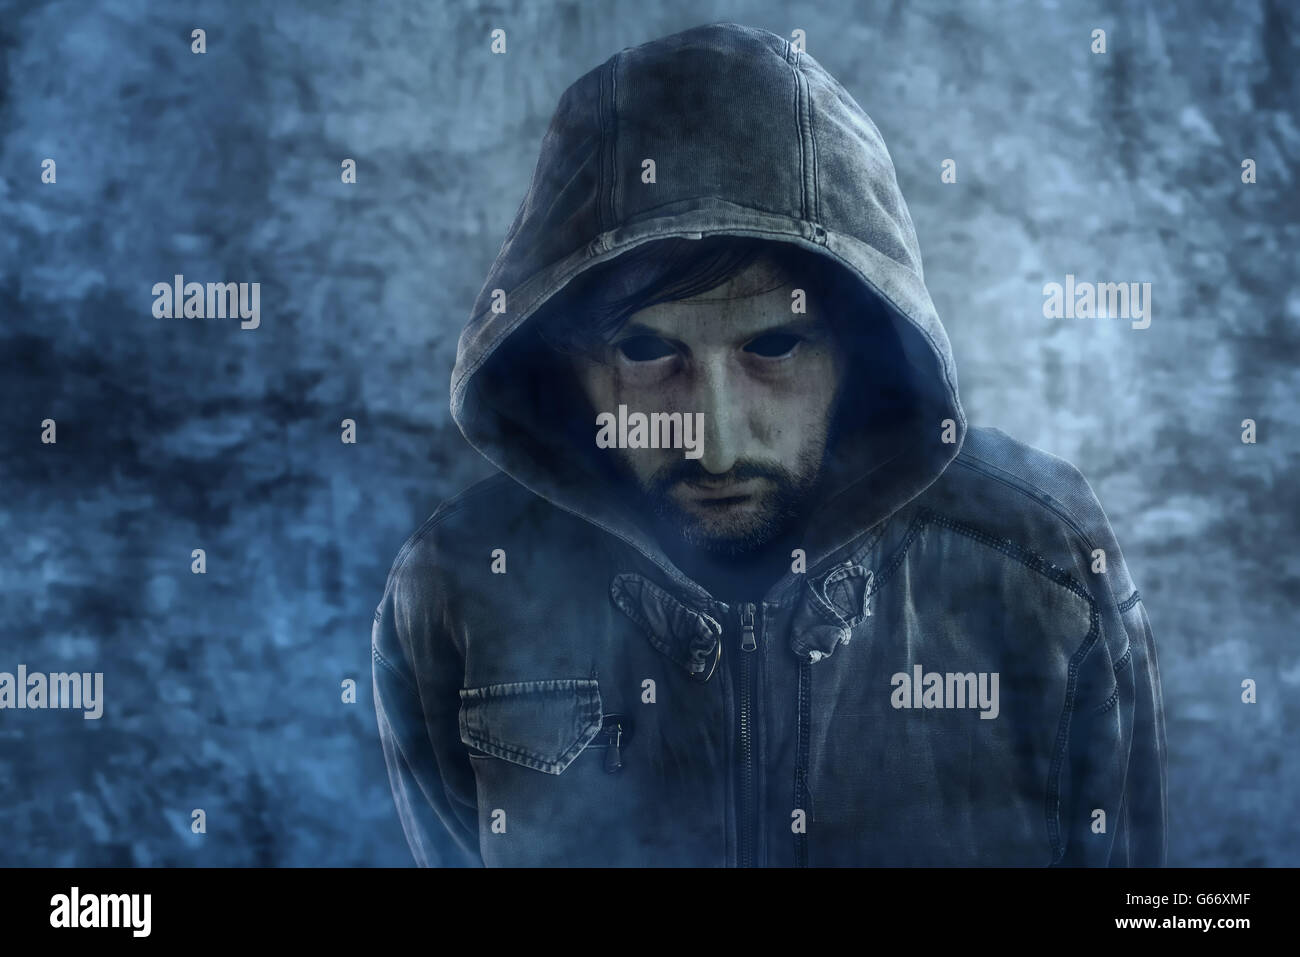 Spooky ghost appearance of dead male person with black eyes and hooded jacket Stock Photo